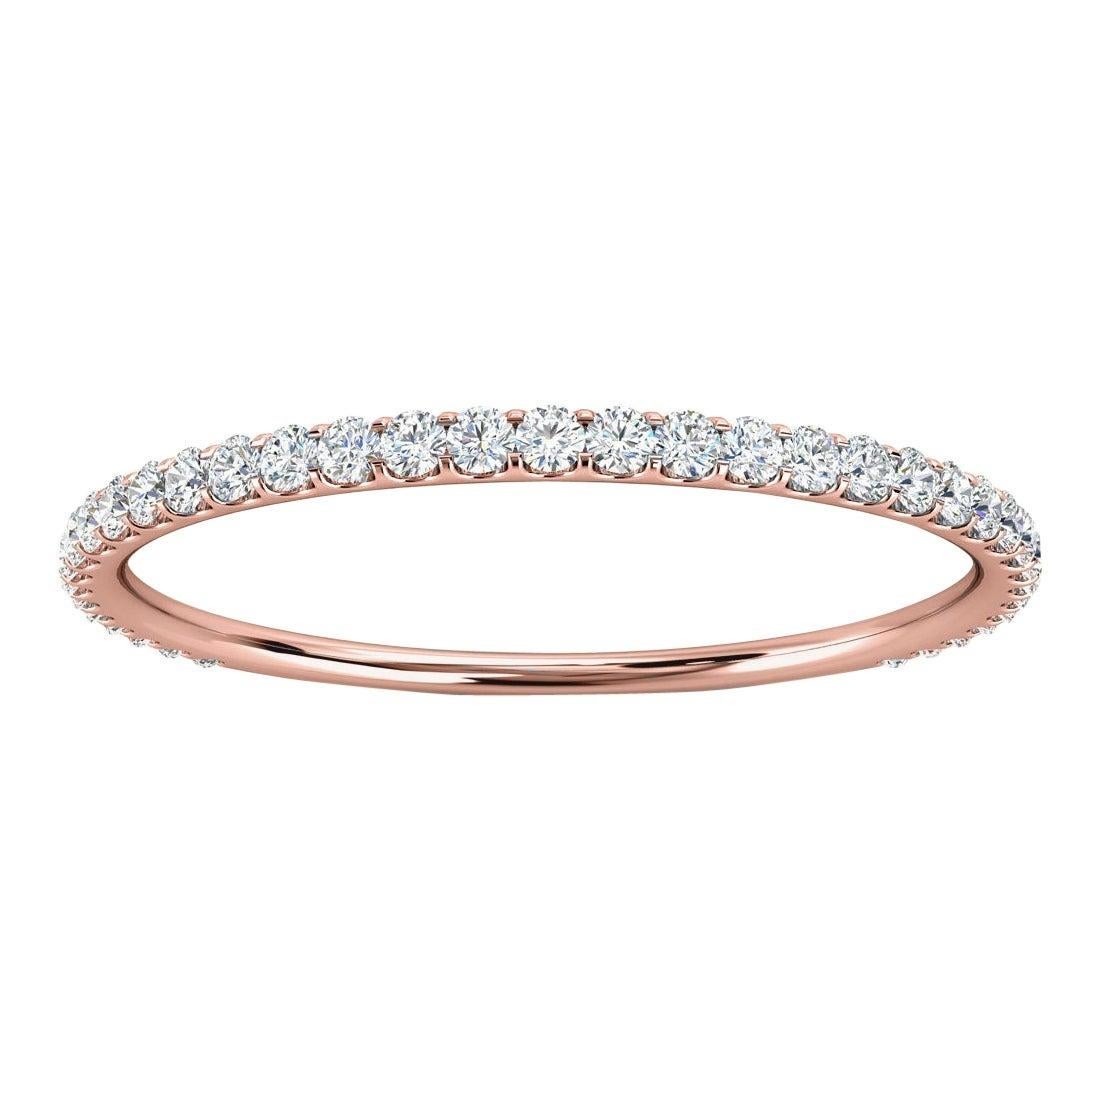 For Sale:  18k Rose Gold Petite Carole Micro-Prong Diamond Ring '1/6 Ct. tw'